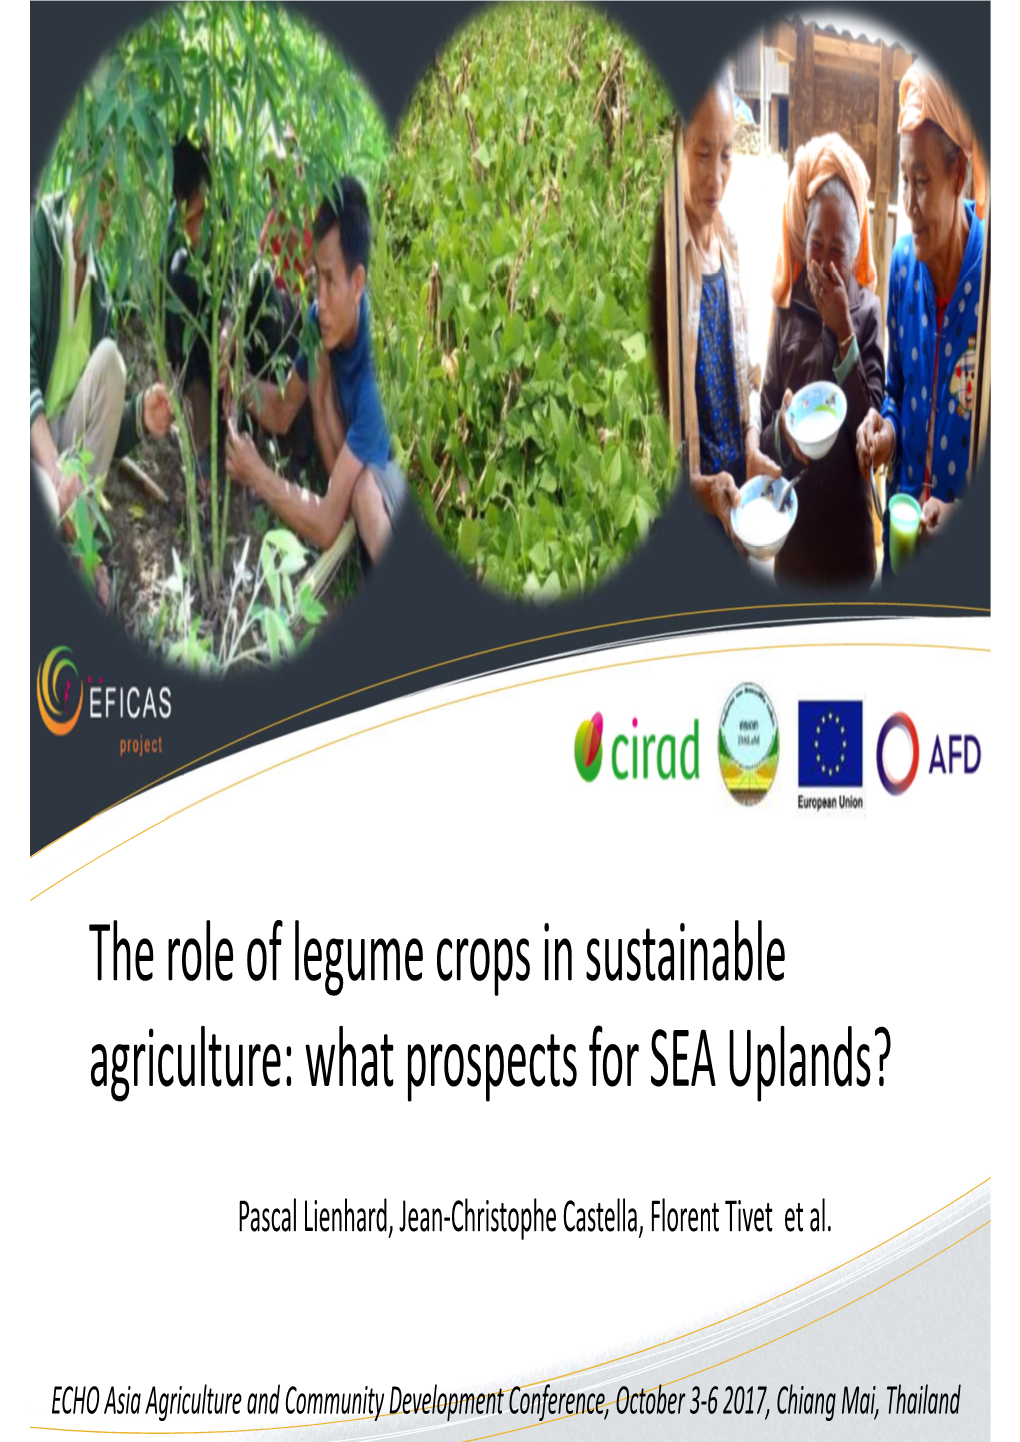 The Role of Legume Crops in Sustainable Agriculture: What Prospects for SEA Uplands?